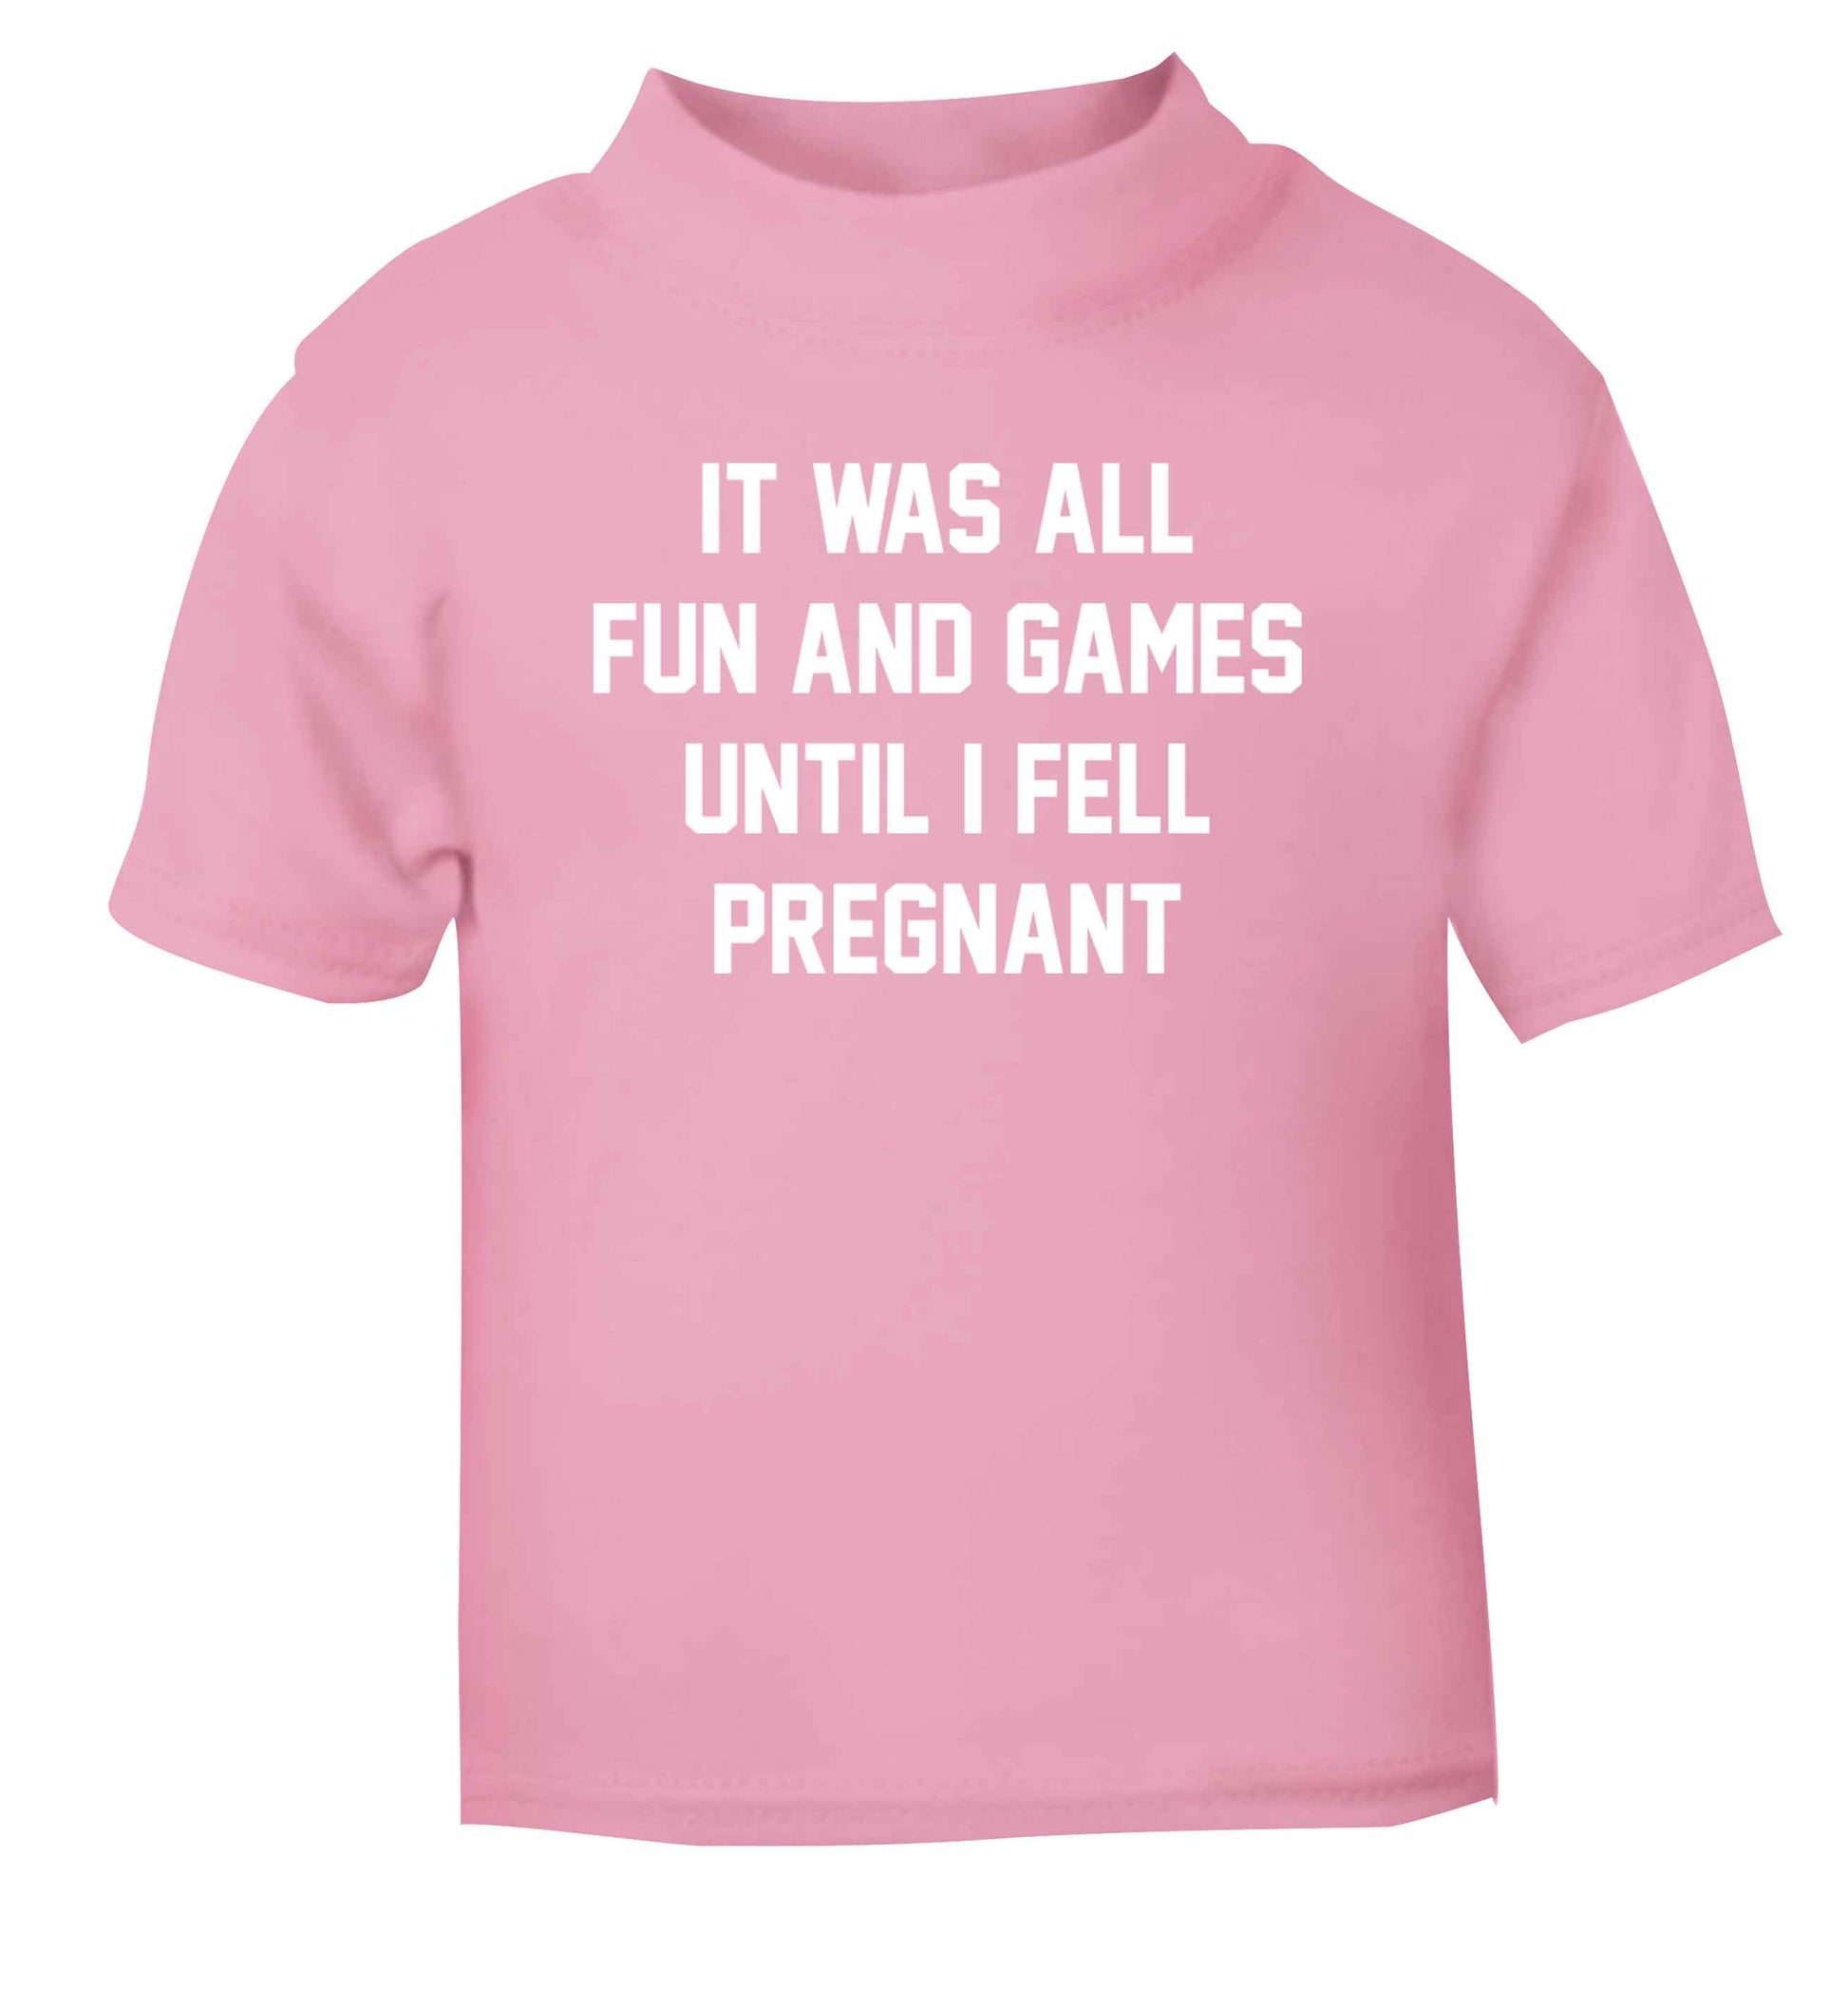 It was all fun and games until I fell pregnant kicks light pink Baby Toddler Tshirt 2 Years